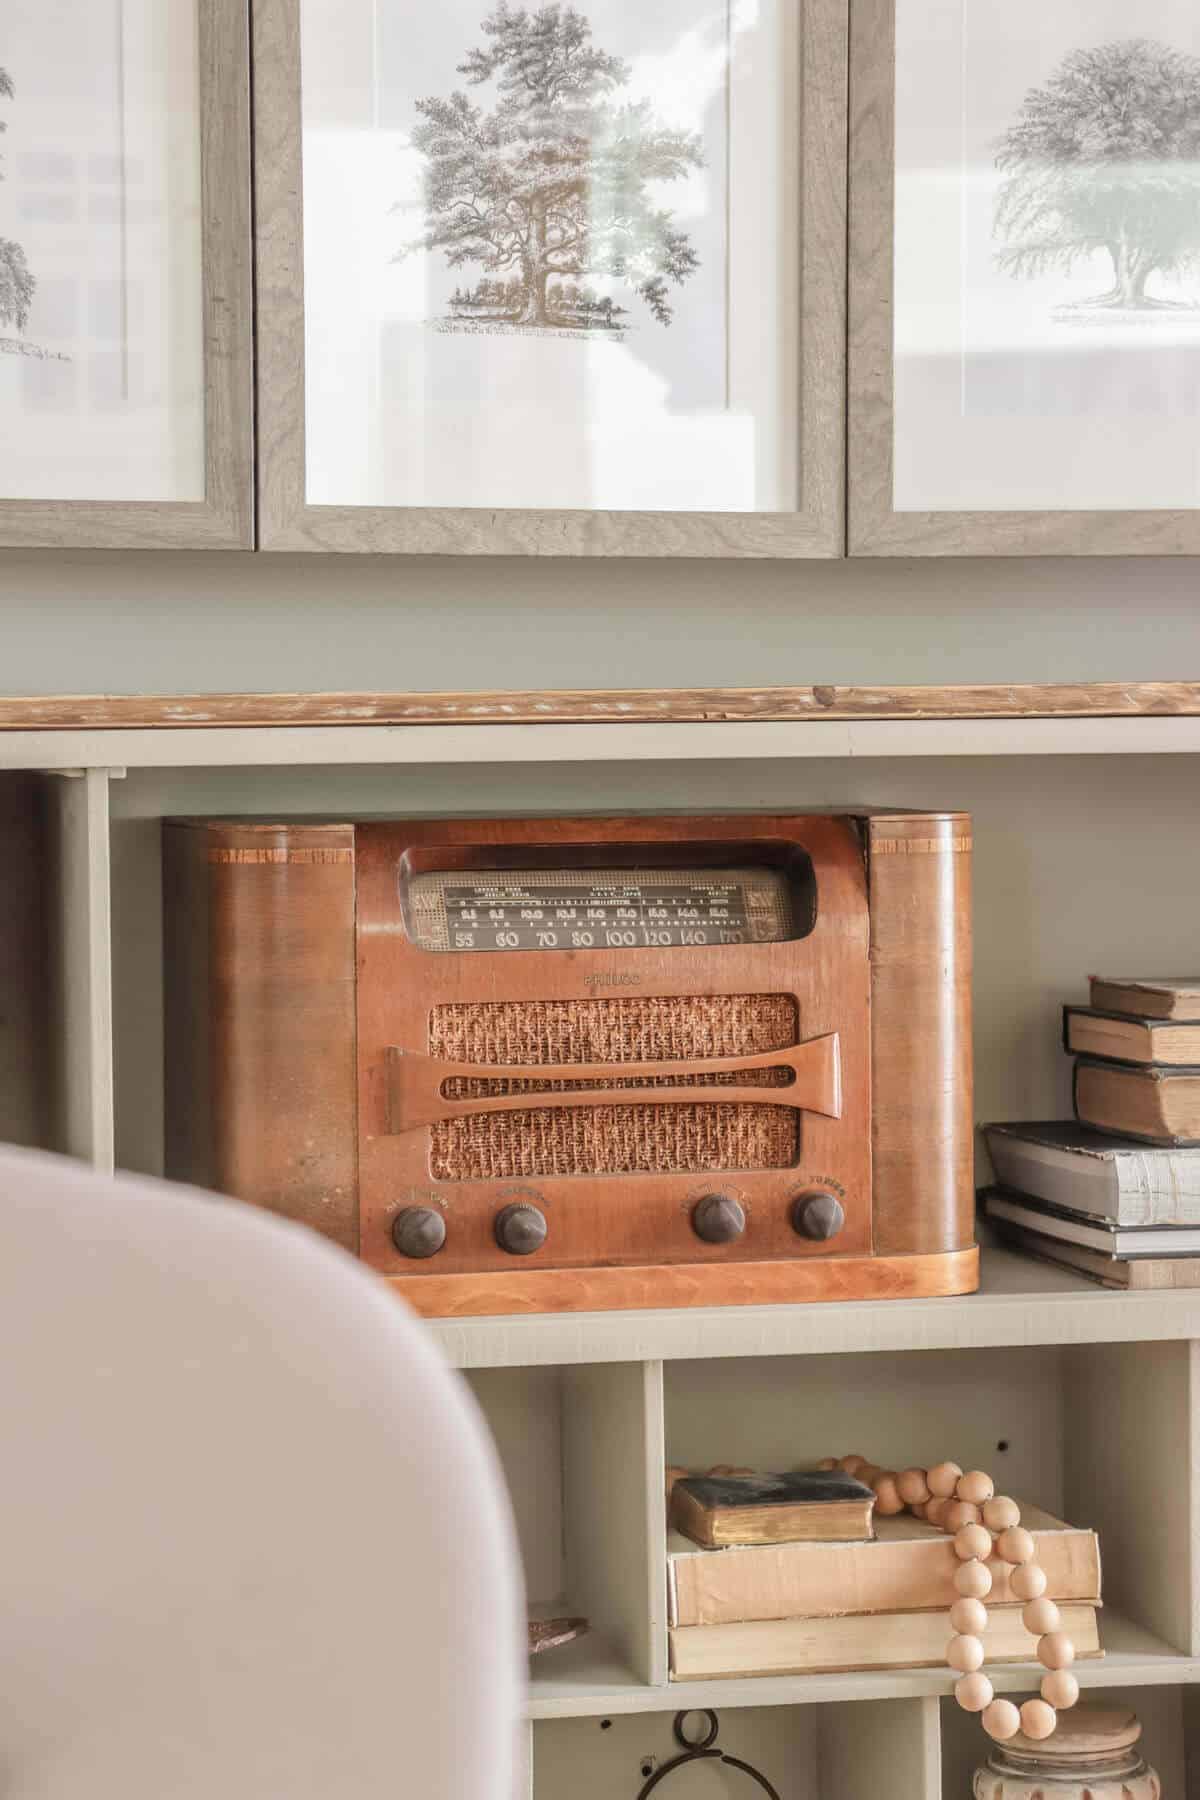 Vintage radio on a shelf with old books